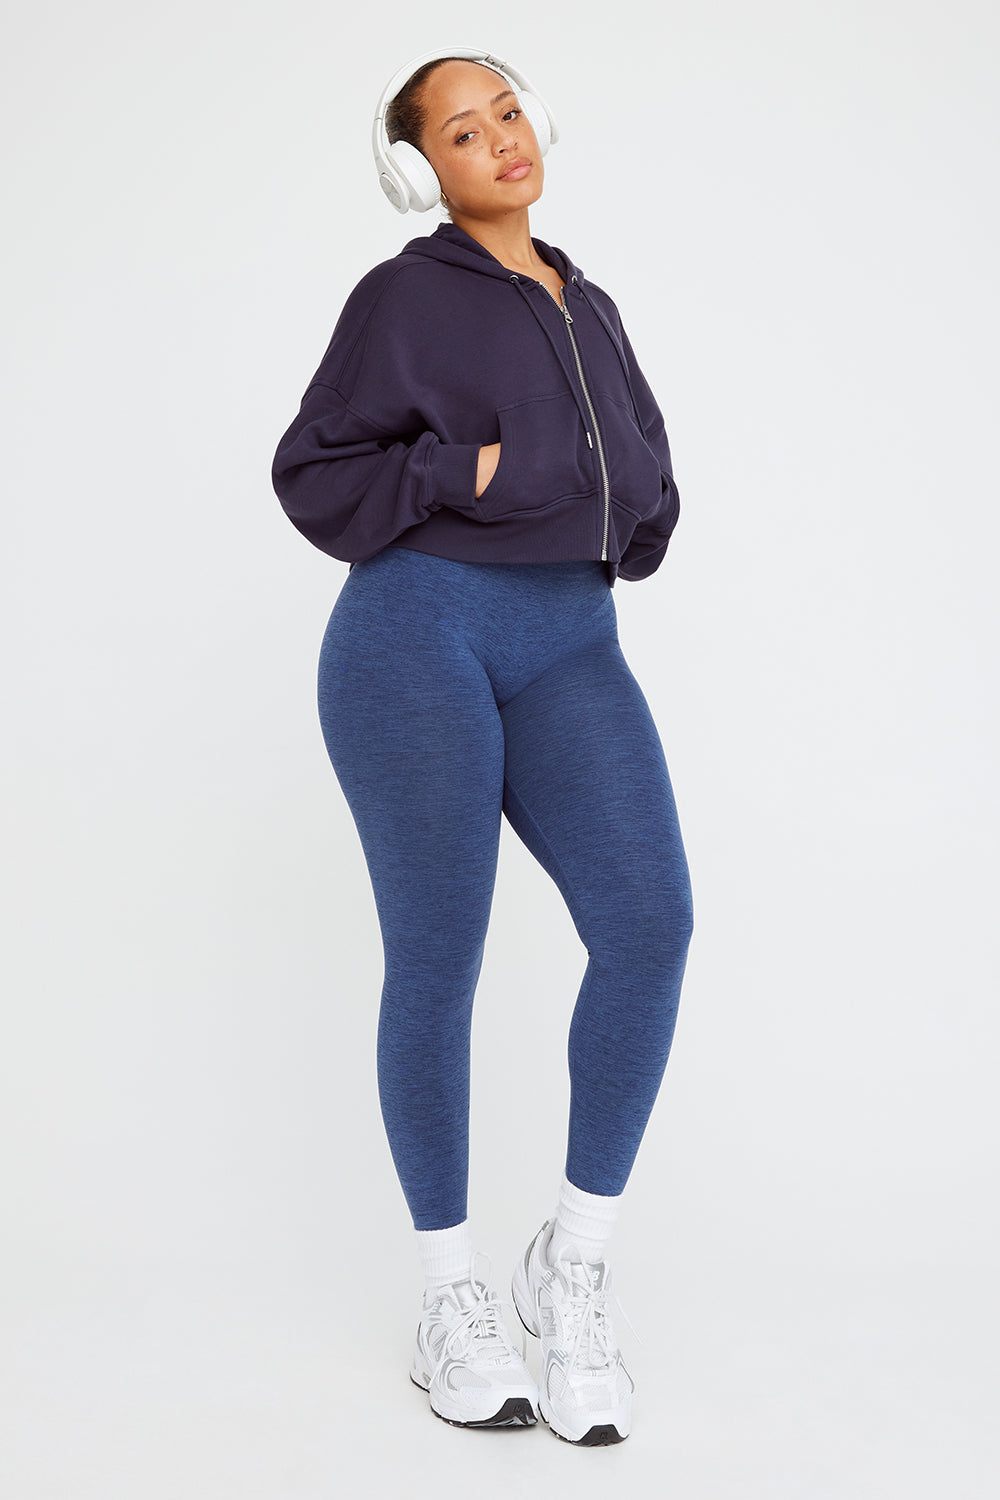 Stay stylish with NVGTN Caribbean Blue leggings